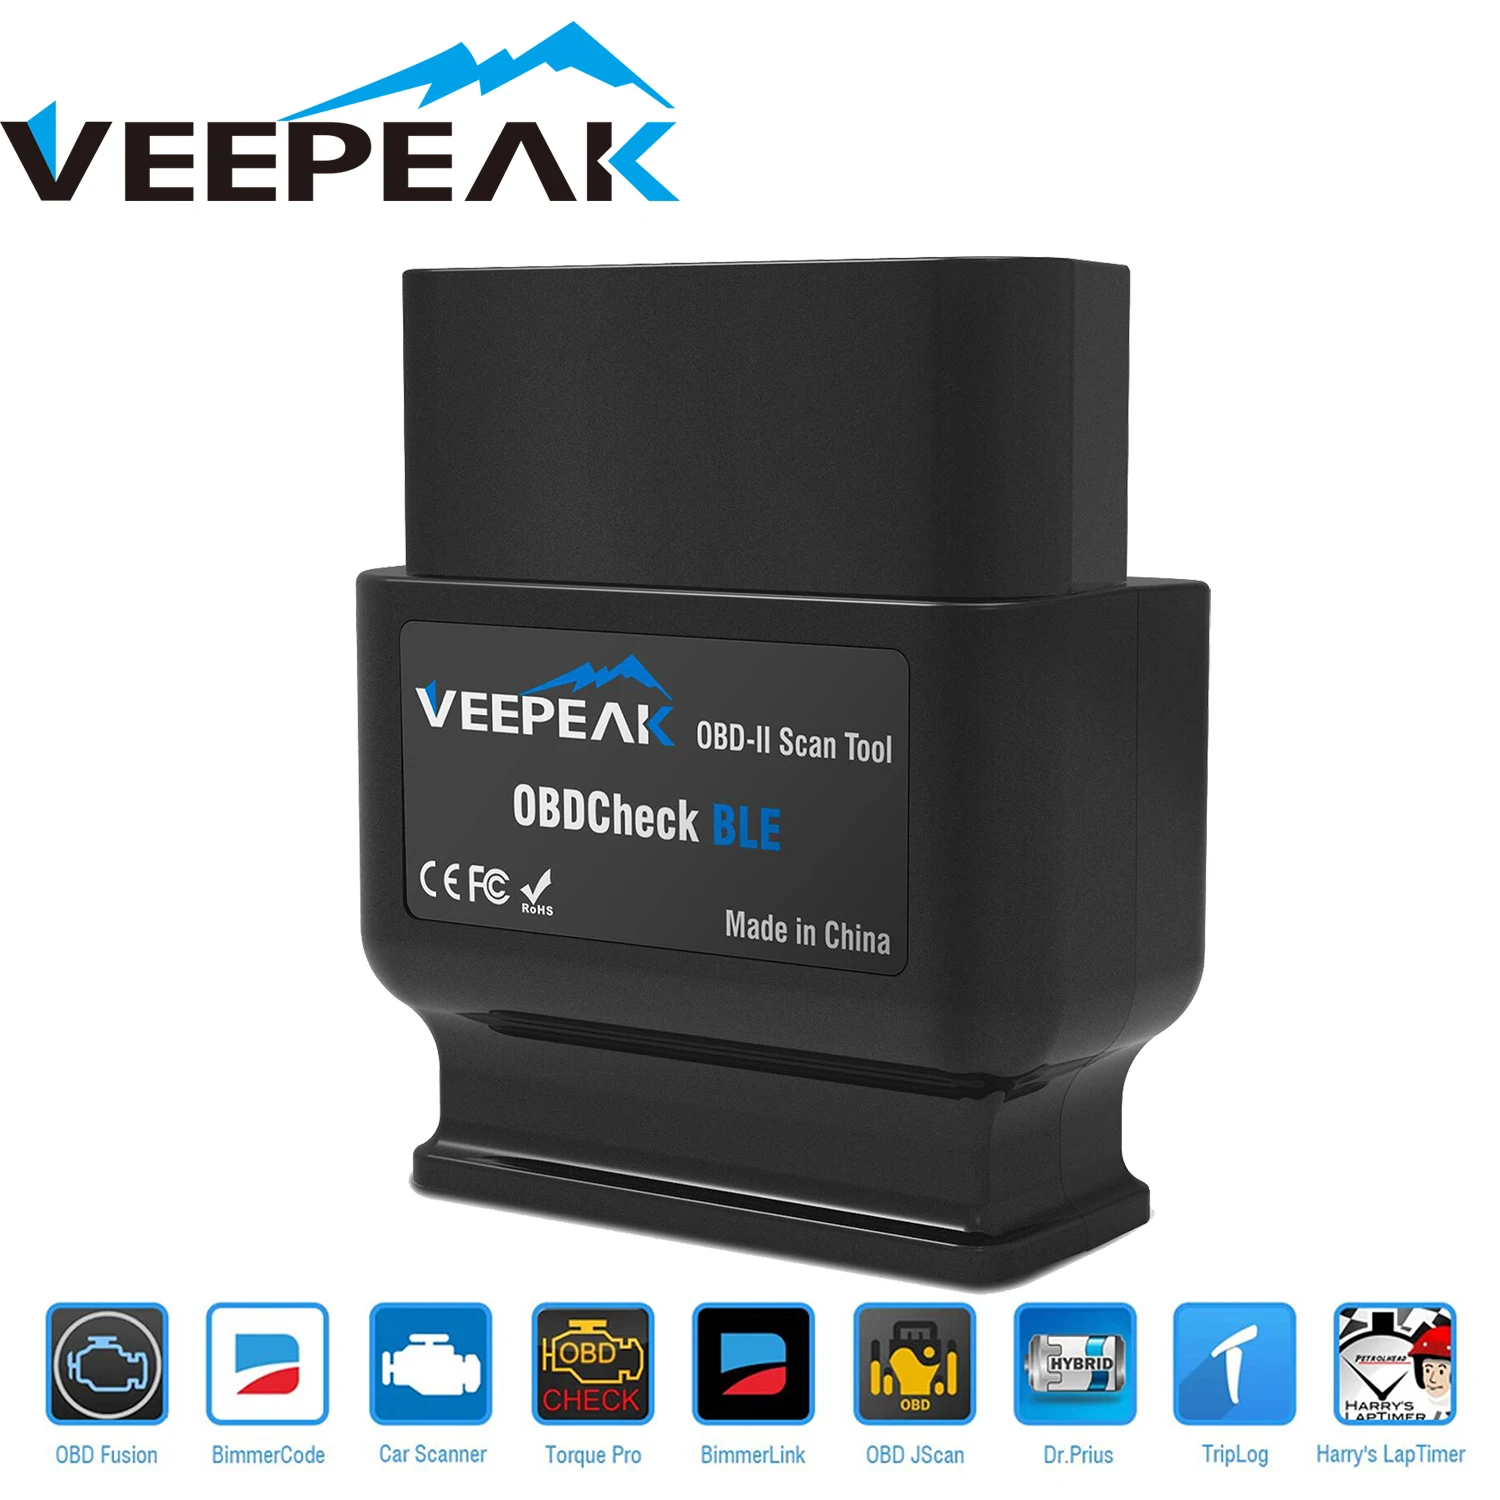 Veepeak OBDCheck BLE OBD2 Bluetooth Scanner Auto OBD II Diagnostic Scan Tool for iOS & Android, BT4.0 Car Check Engine vgate obd2 bluetooth scanner obdii diagnostic scan tool check engine light code reader eobd auto adapter for android